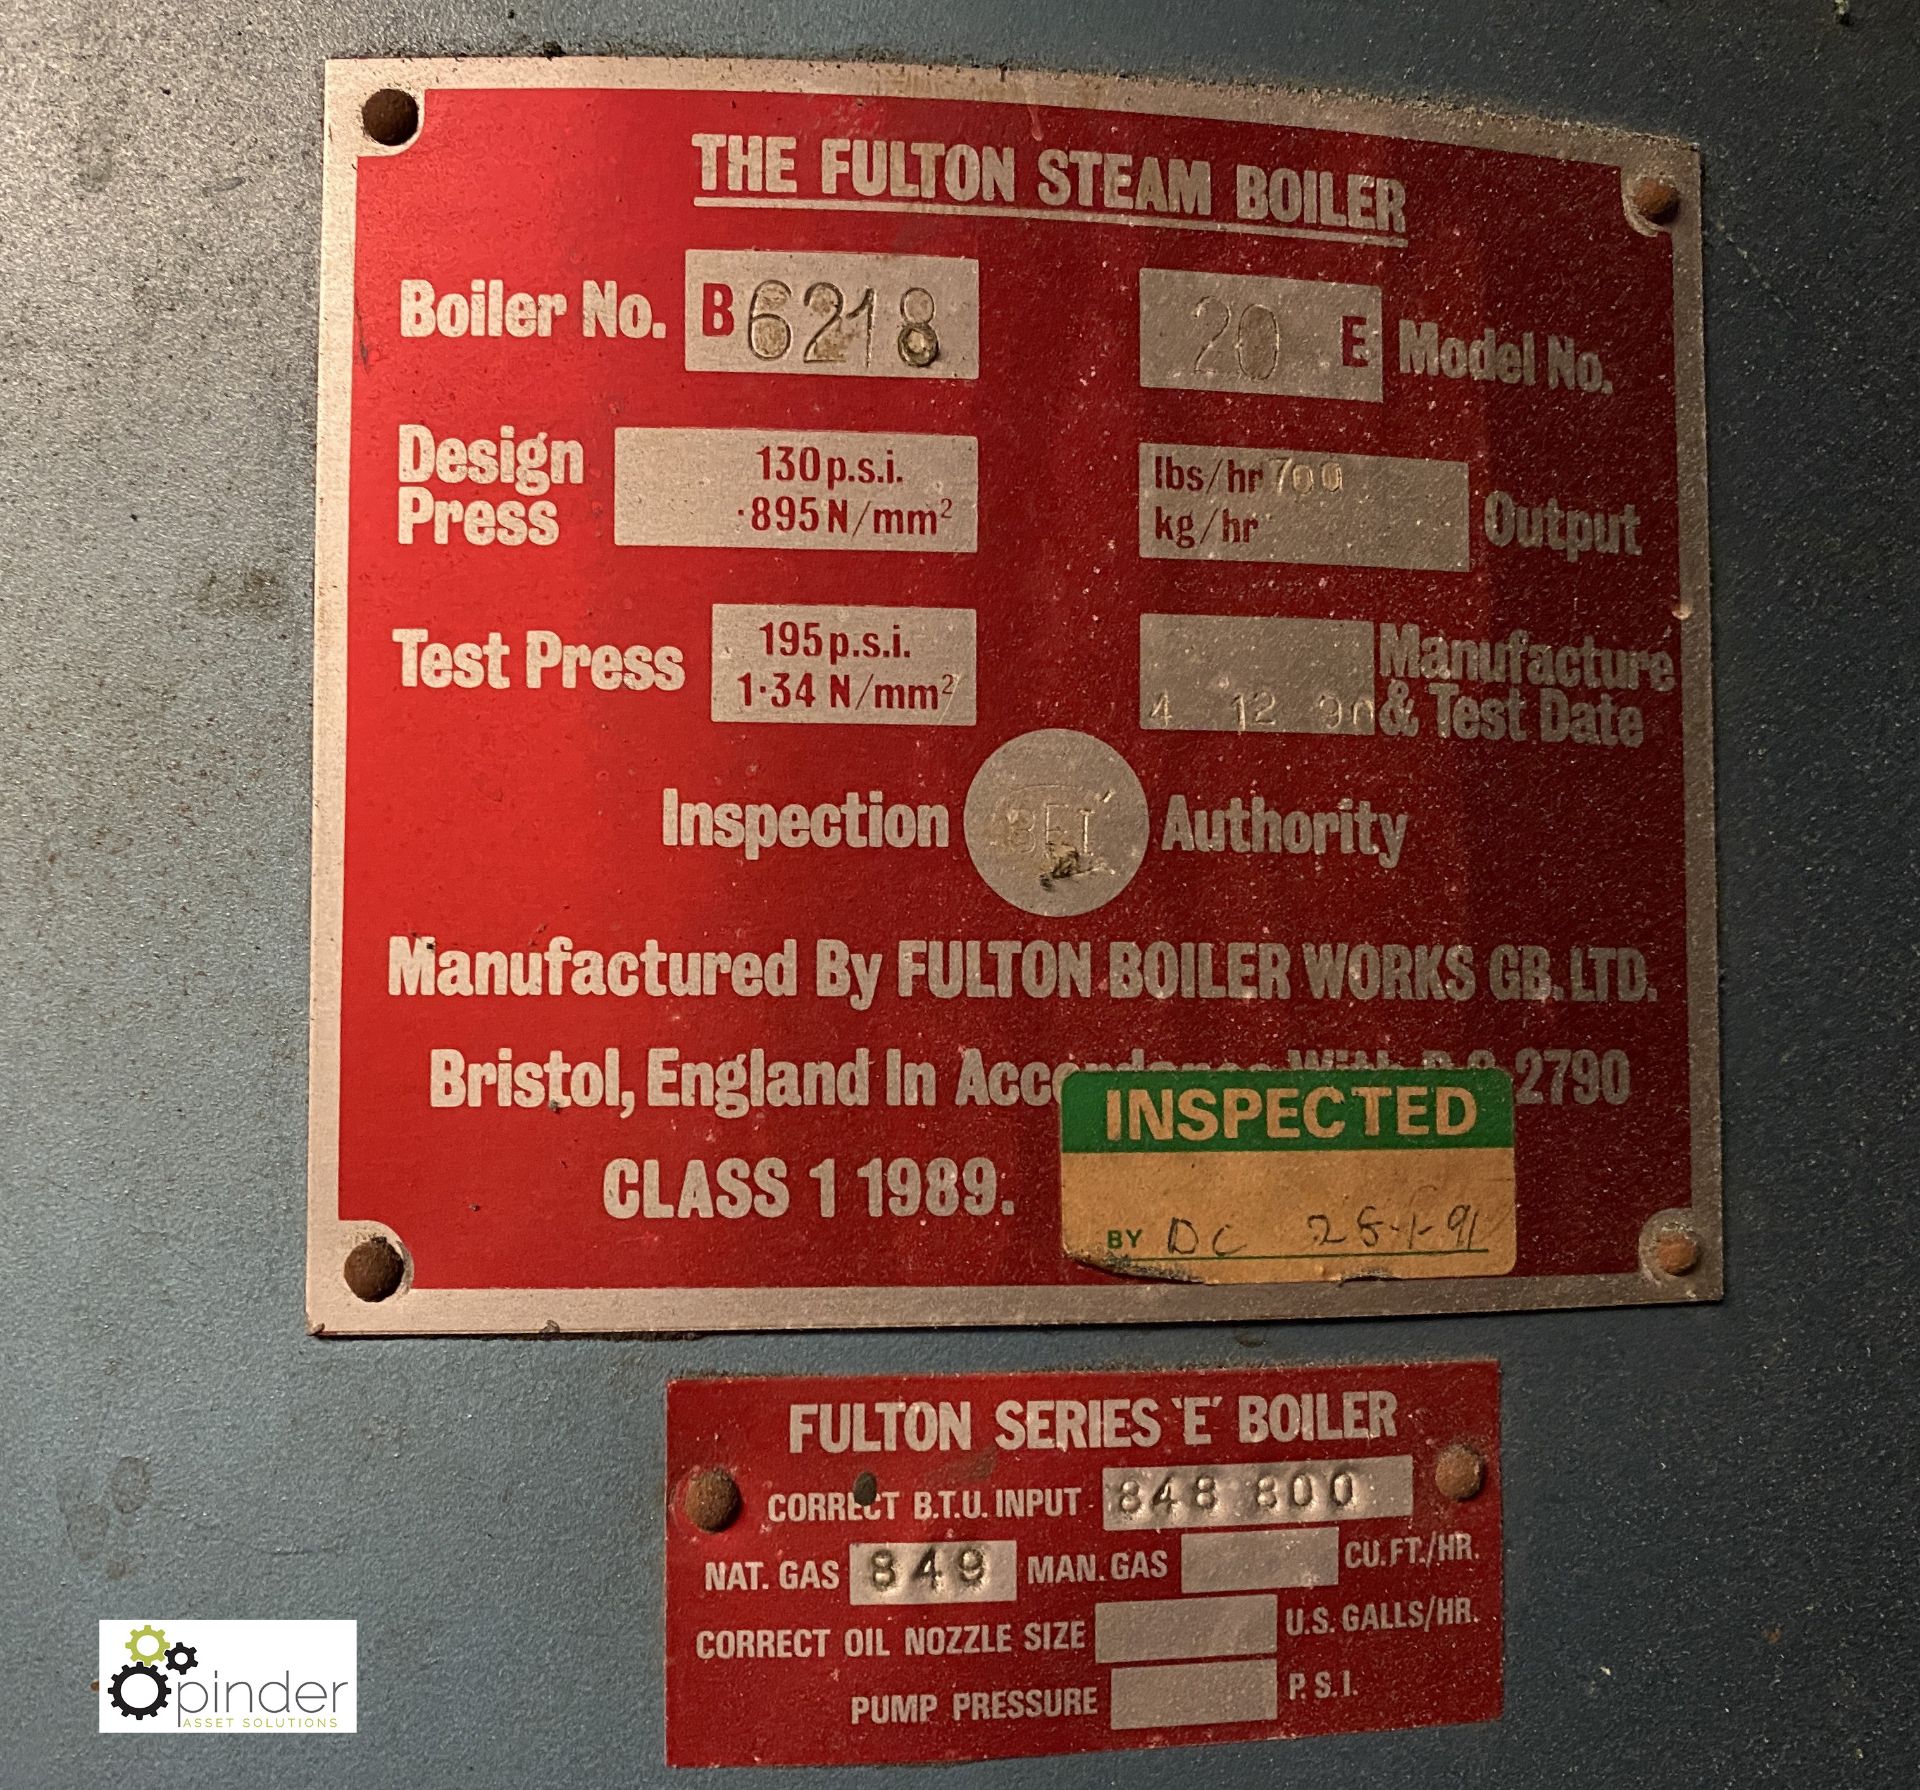 Fulton 20E Steam Boiler, design pressure 130psi, output 700lbs/hr, year Dec 1990, serial number 6218 - Image 3 of 5